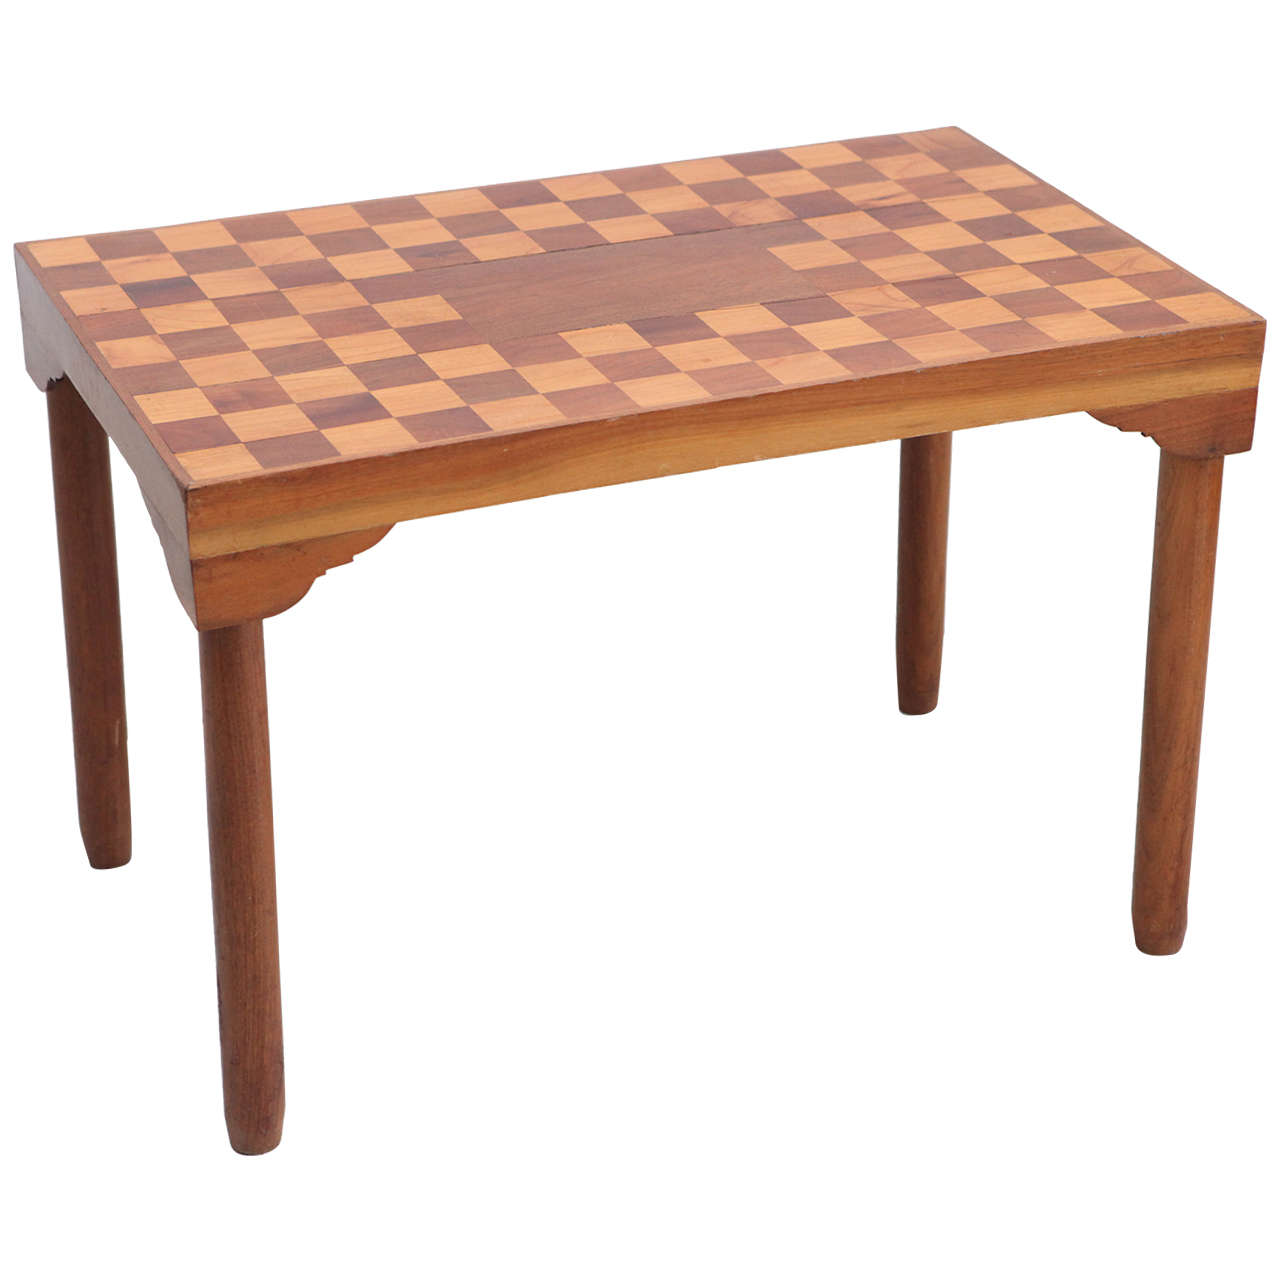 Checker Inlay Wood Side Table